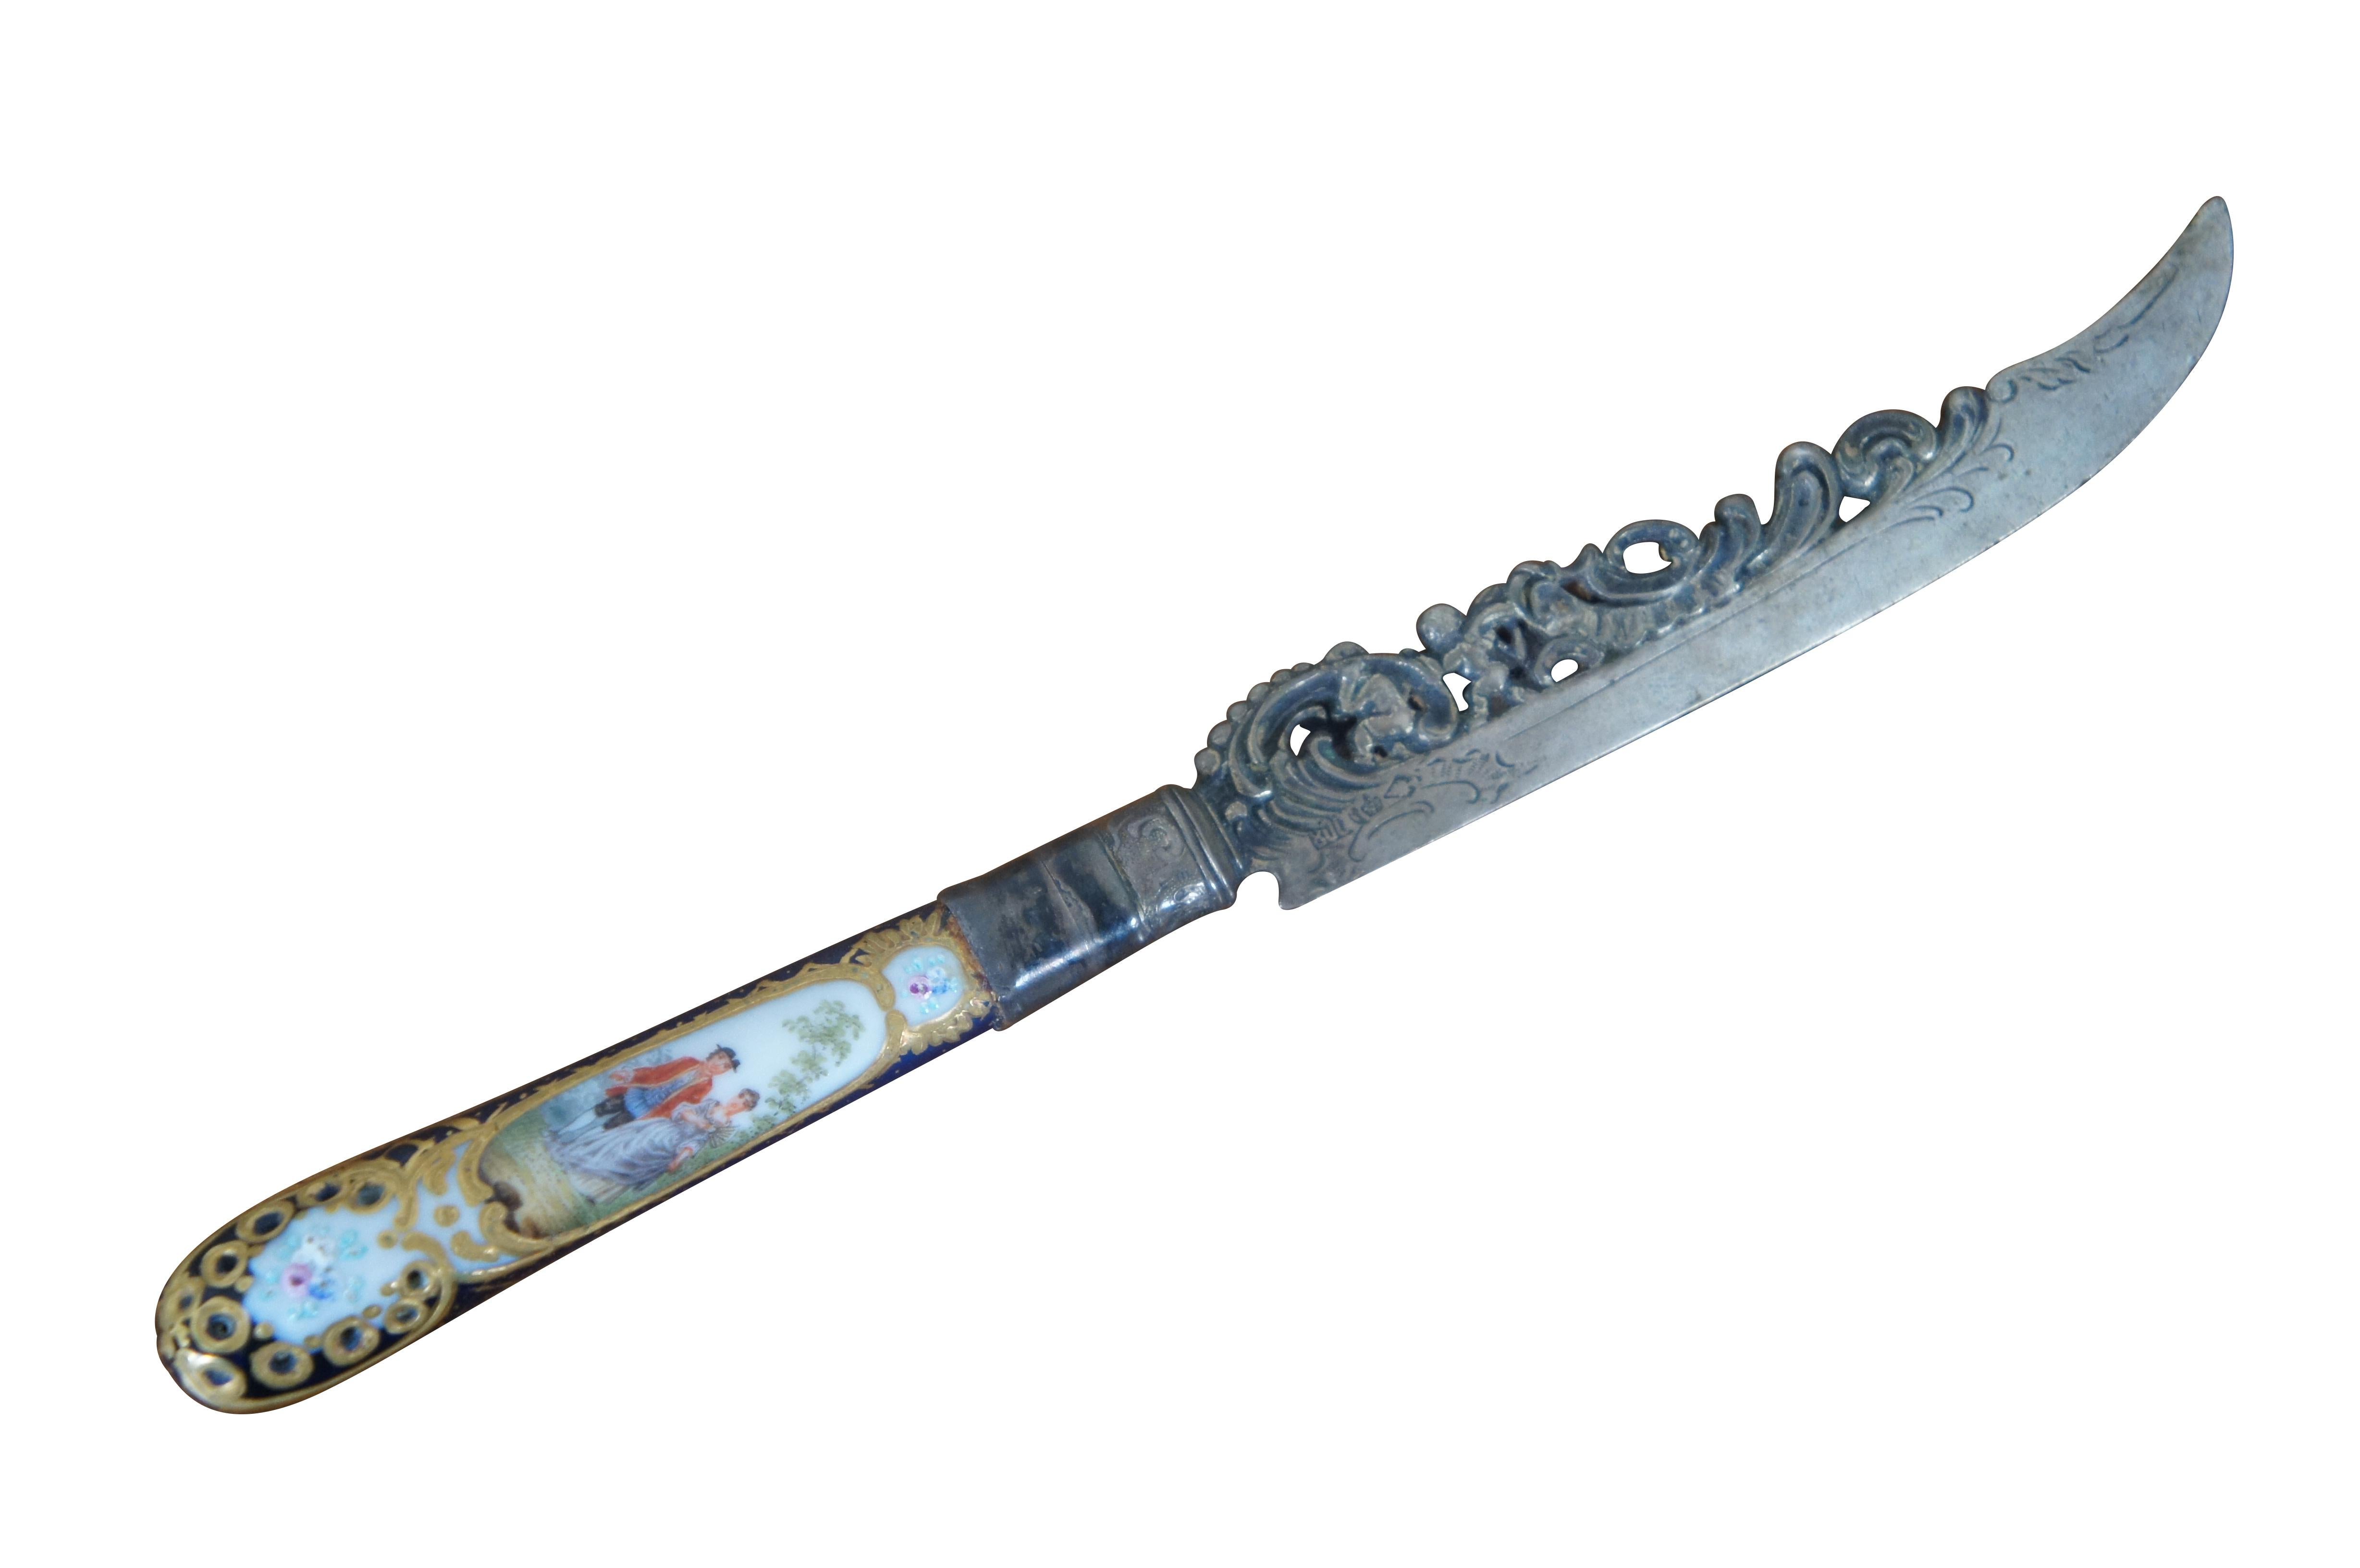 Antique 800 silver porcelain serving knife by Richard Garten, featuring a reticulated baroque blade with figural cherubs and a hand painted cobalt blue and gold accent handle with two colonial couples. 

